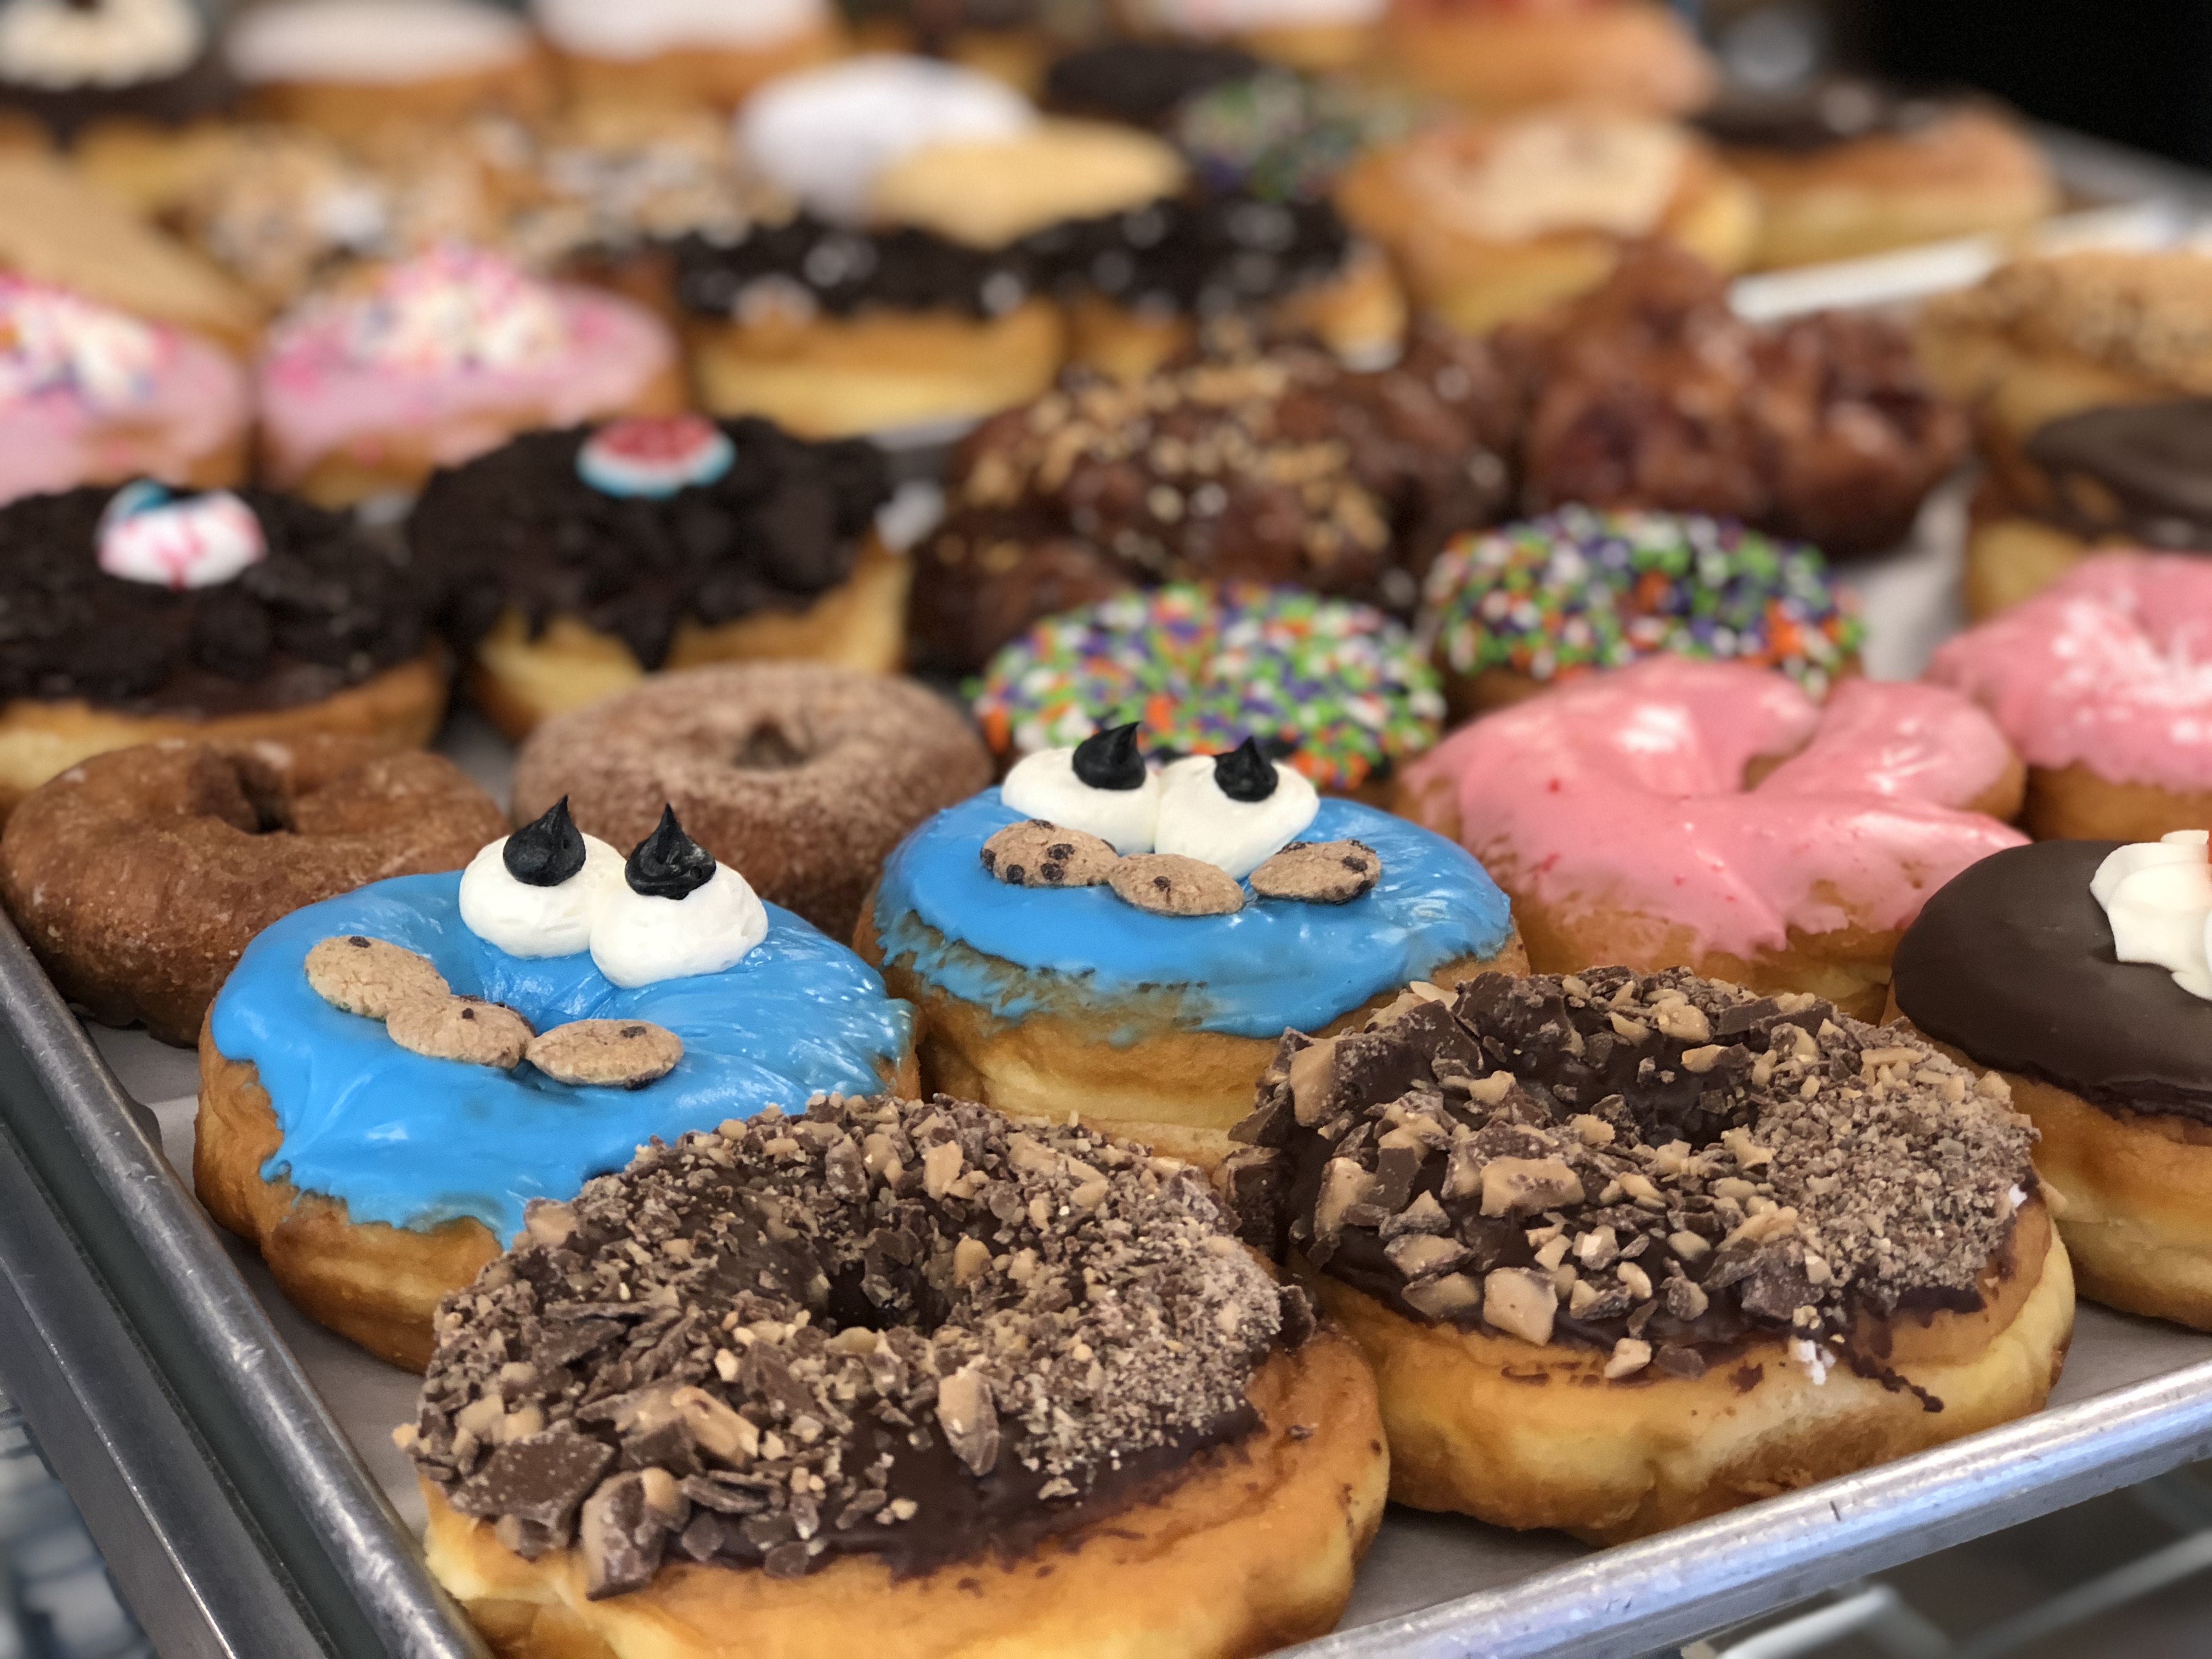 Dozen Assorted Classic Donuts — Groovy Donuts